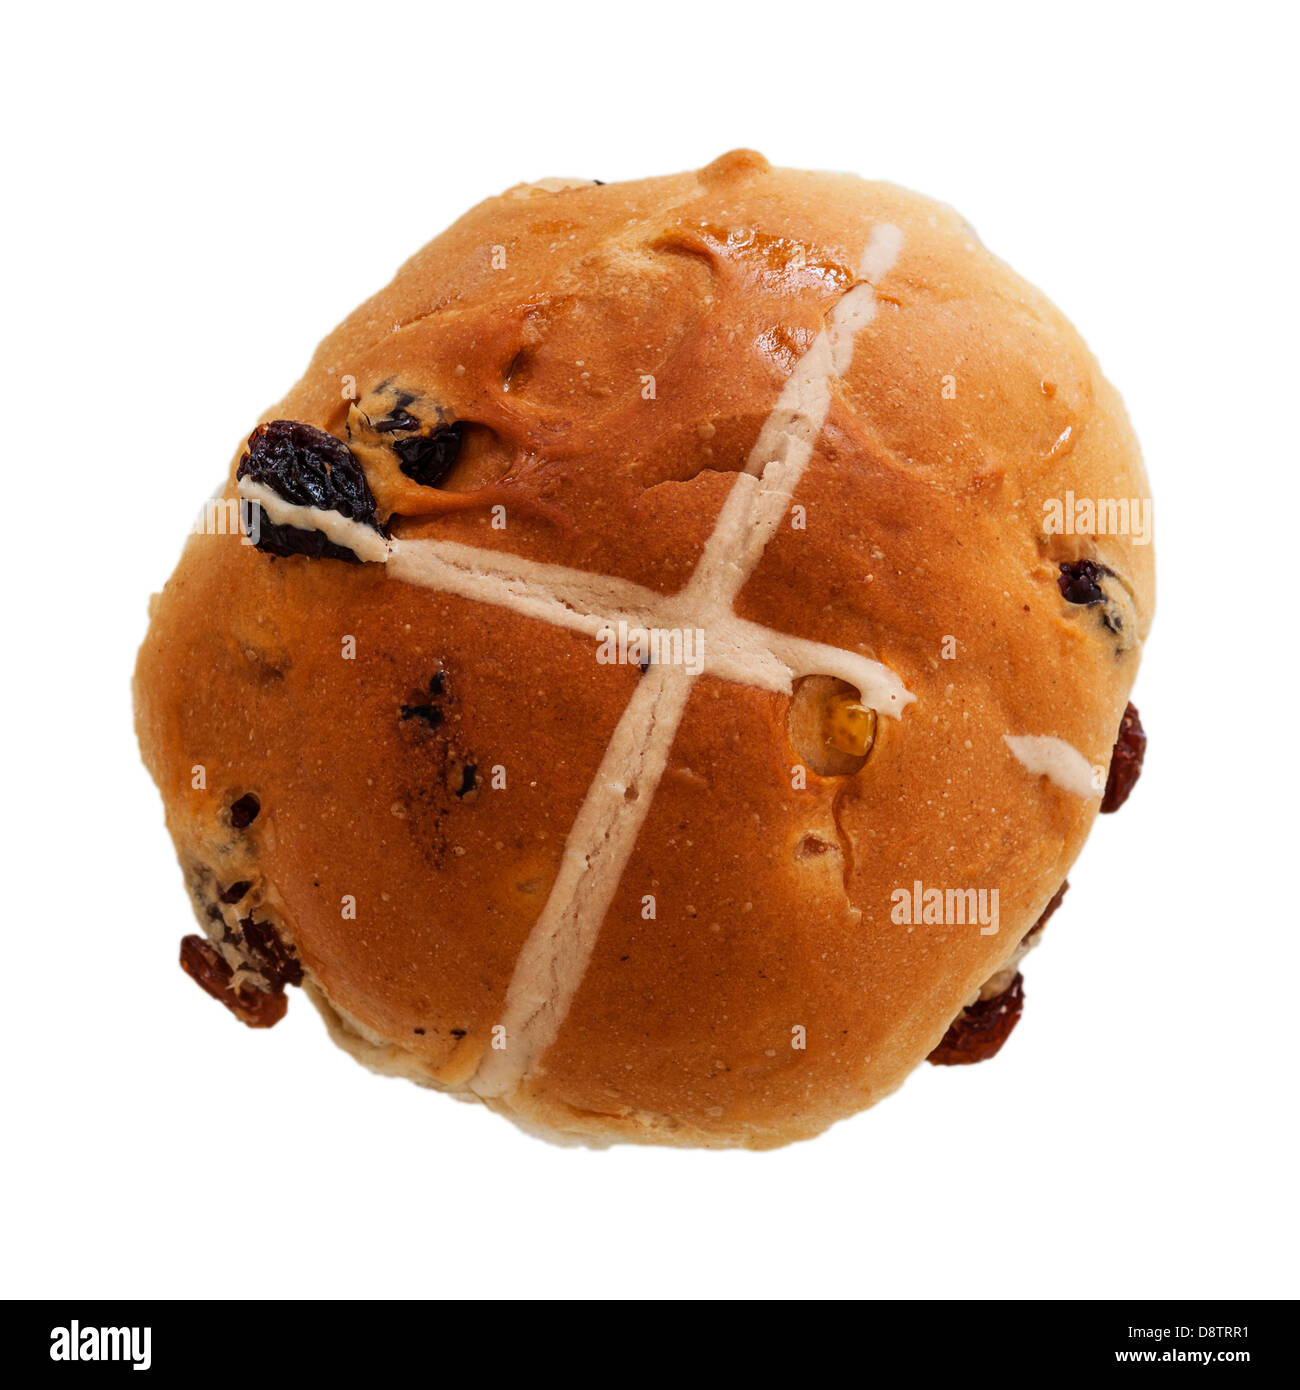 A hot cross bun on a white background Stock Photo